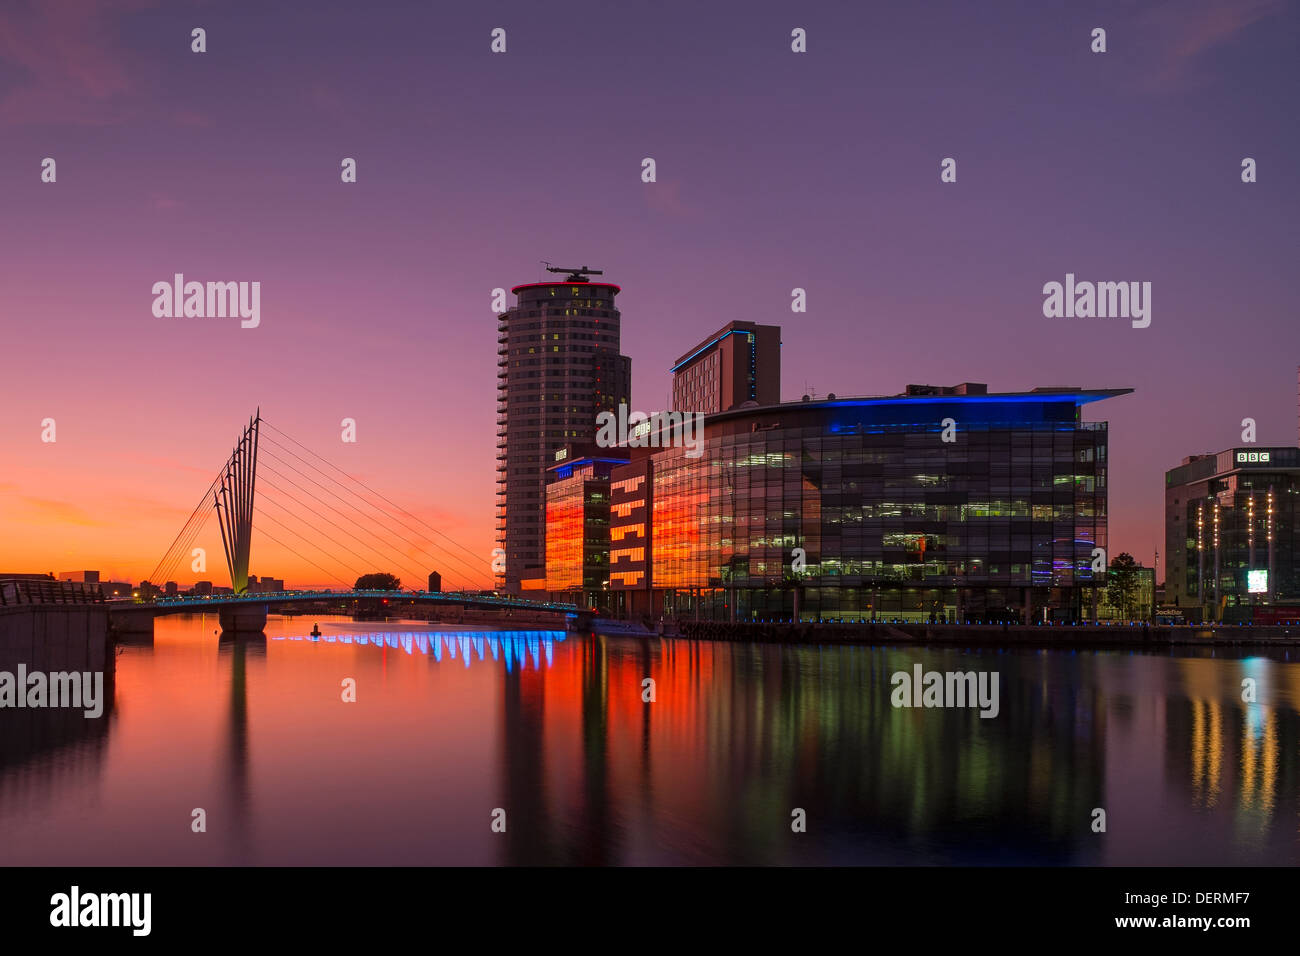 England, Greater Manchester, Salford Quays, Media City at sunset Stock Photo